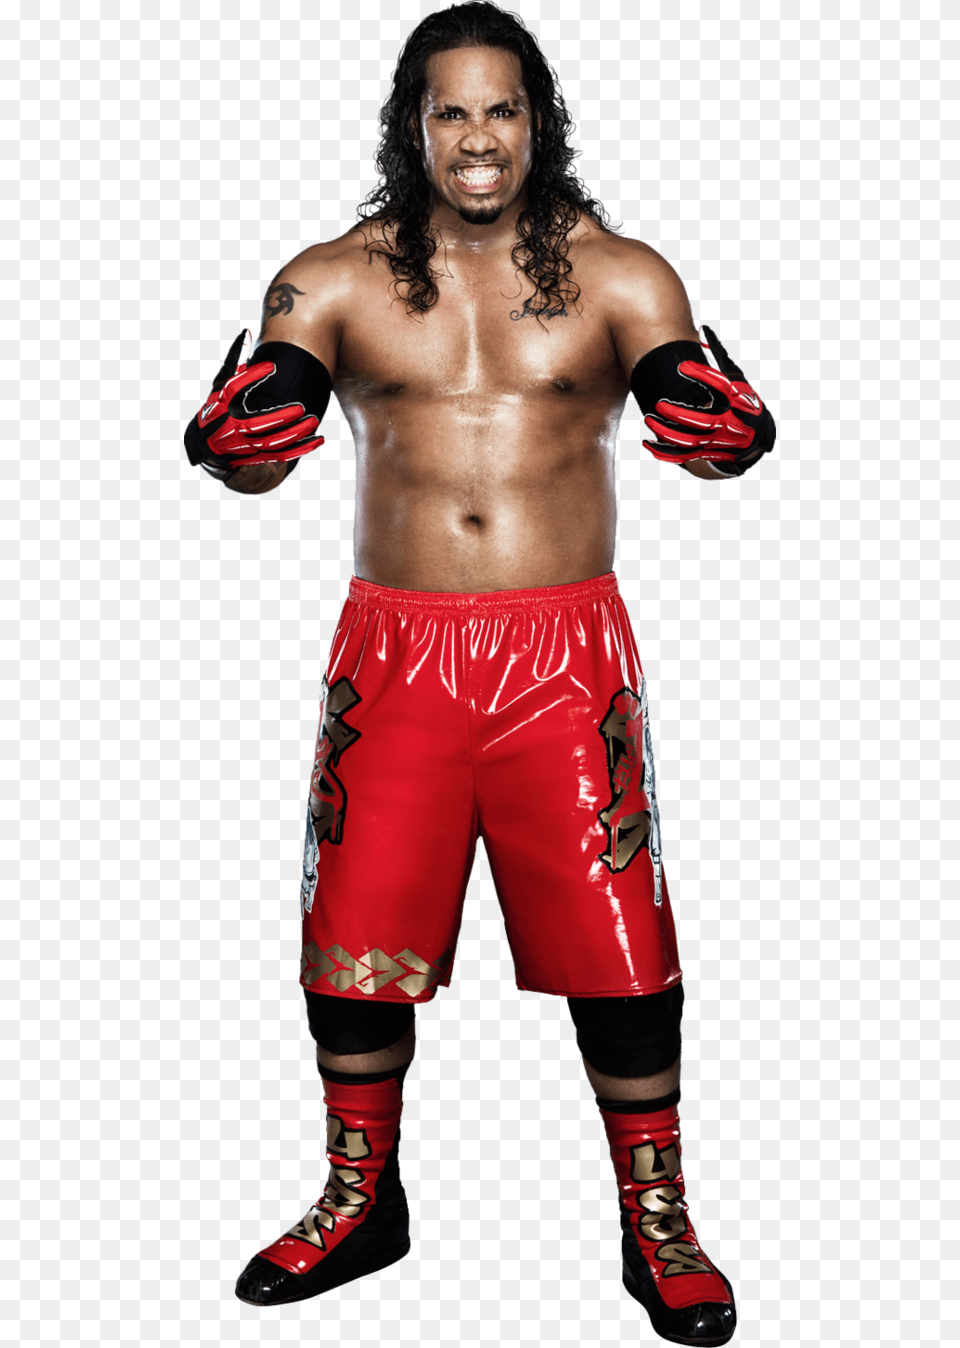 Jey Uso Jey Uso Wwe Wwe Wrestlers And Wrestling, Clothing, Shorts, Adult, Person Png Image